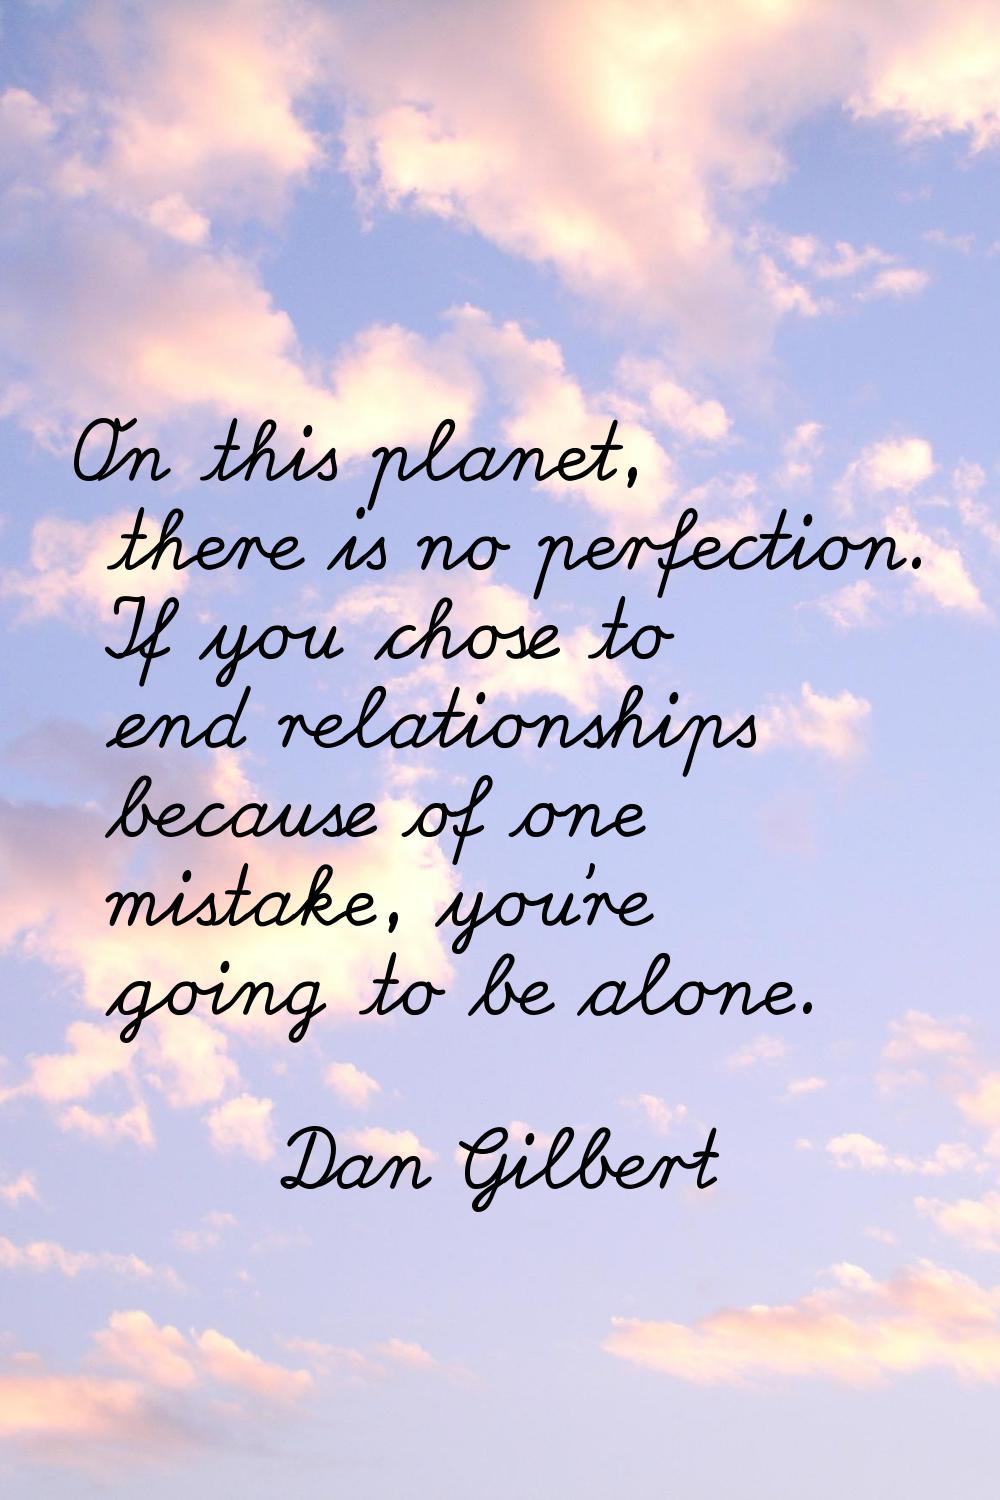 On this planet, there is no perfection. If you chose to end relationships because of one mistake, y